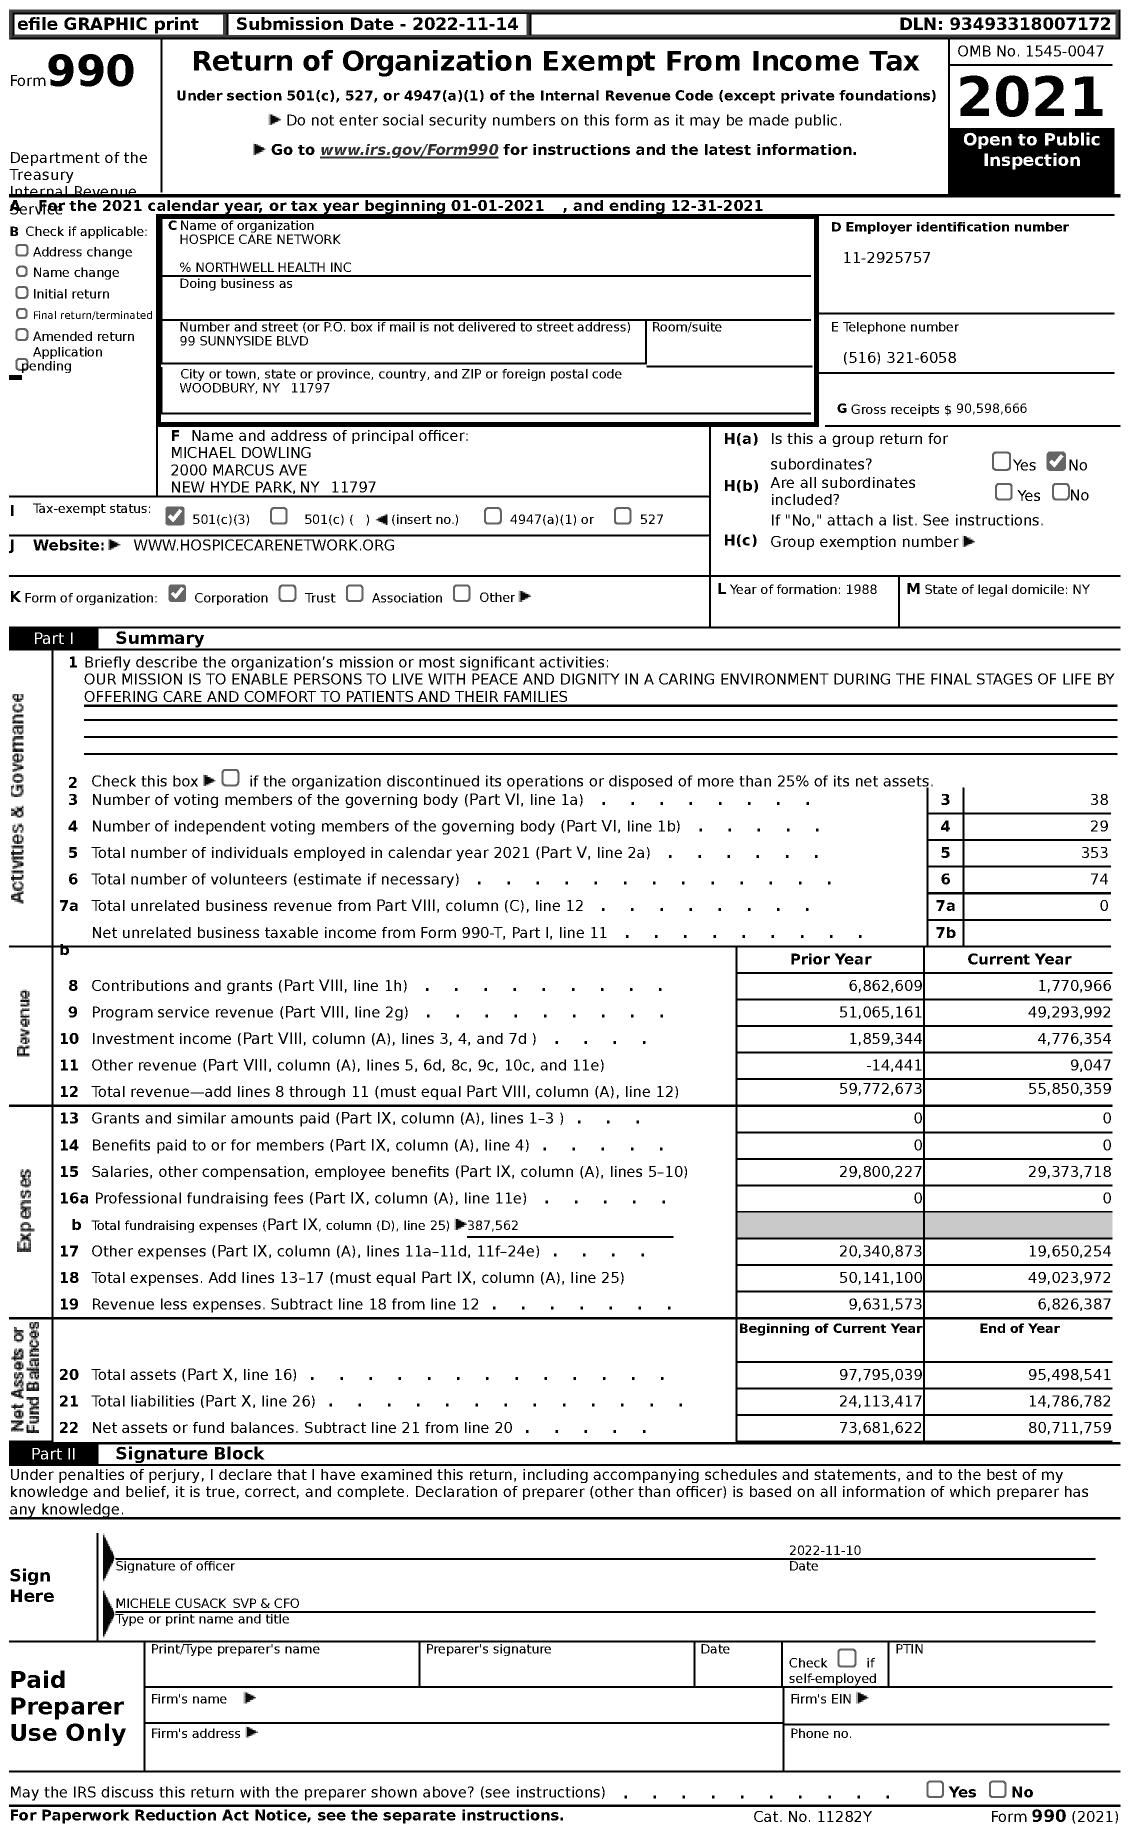 Image of first page of 2021 Form 990 for Hospice Care Network (HCN)